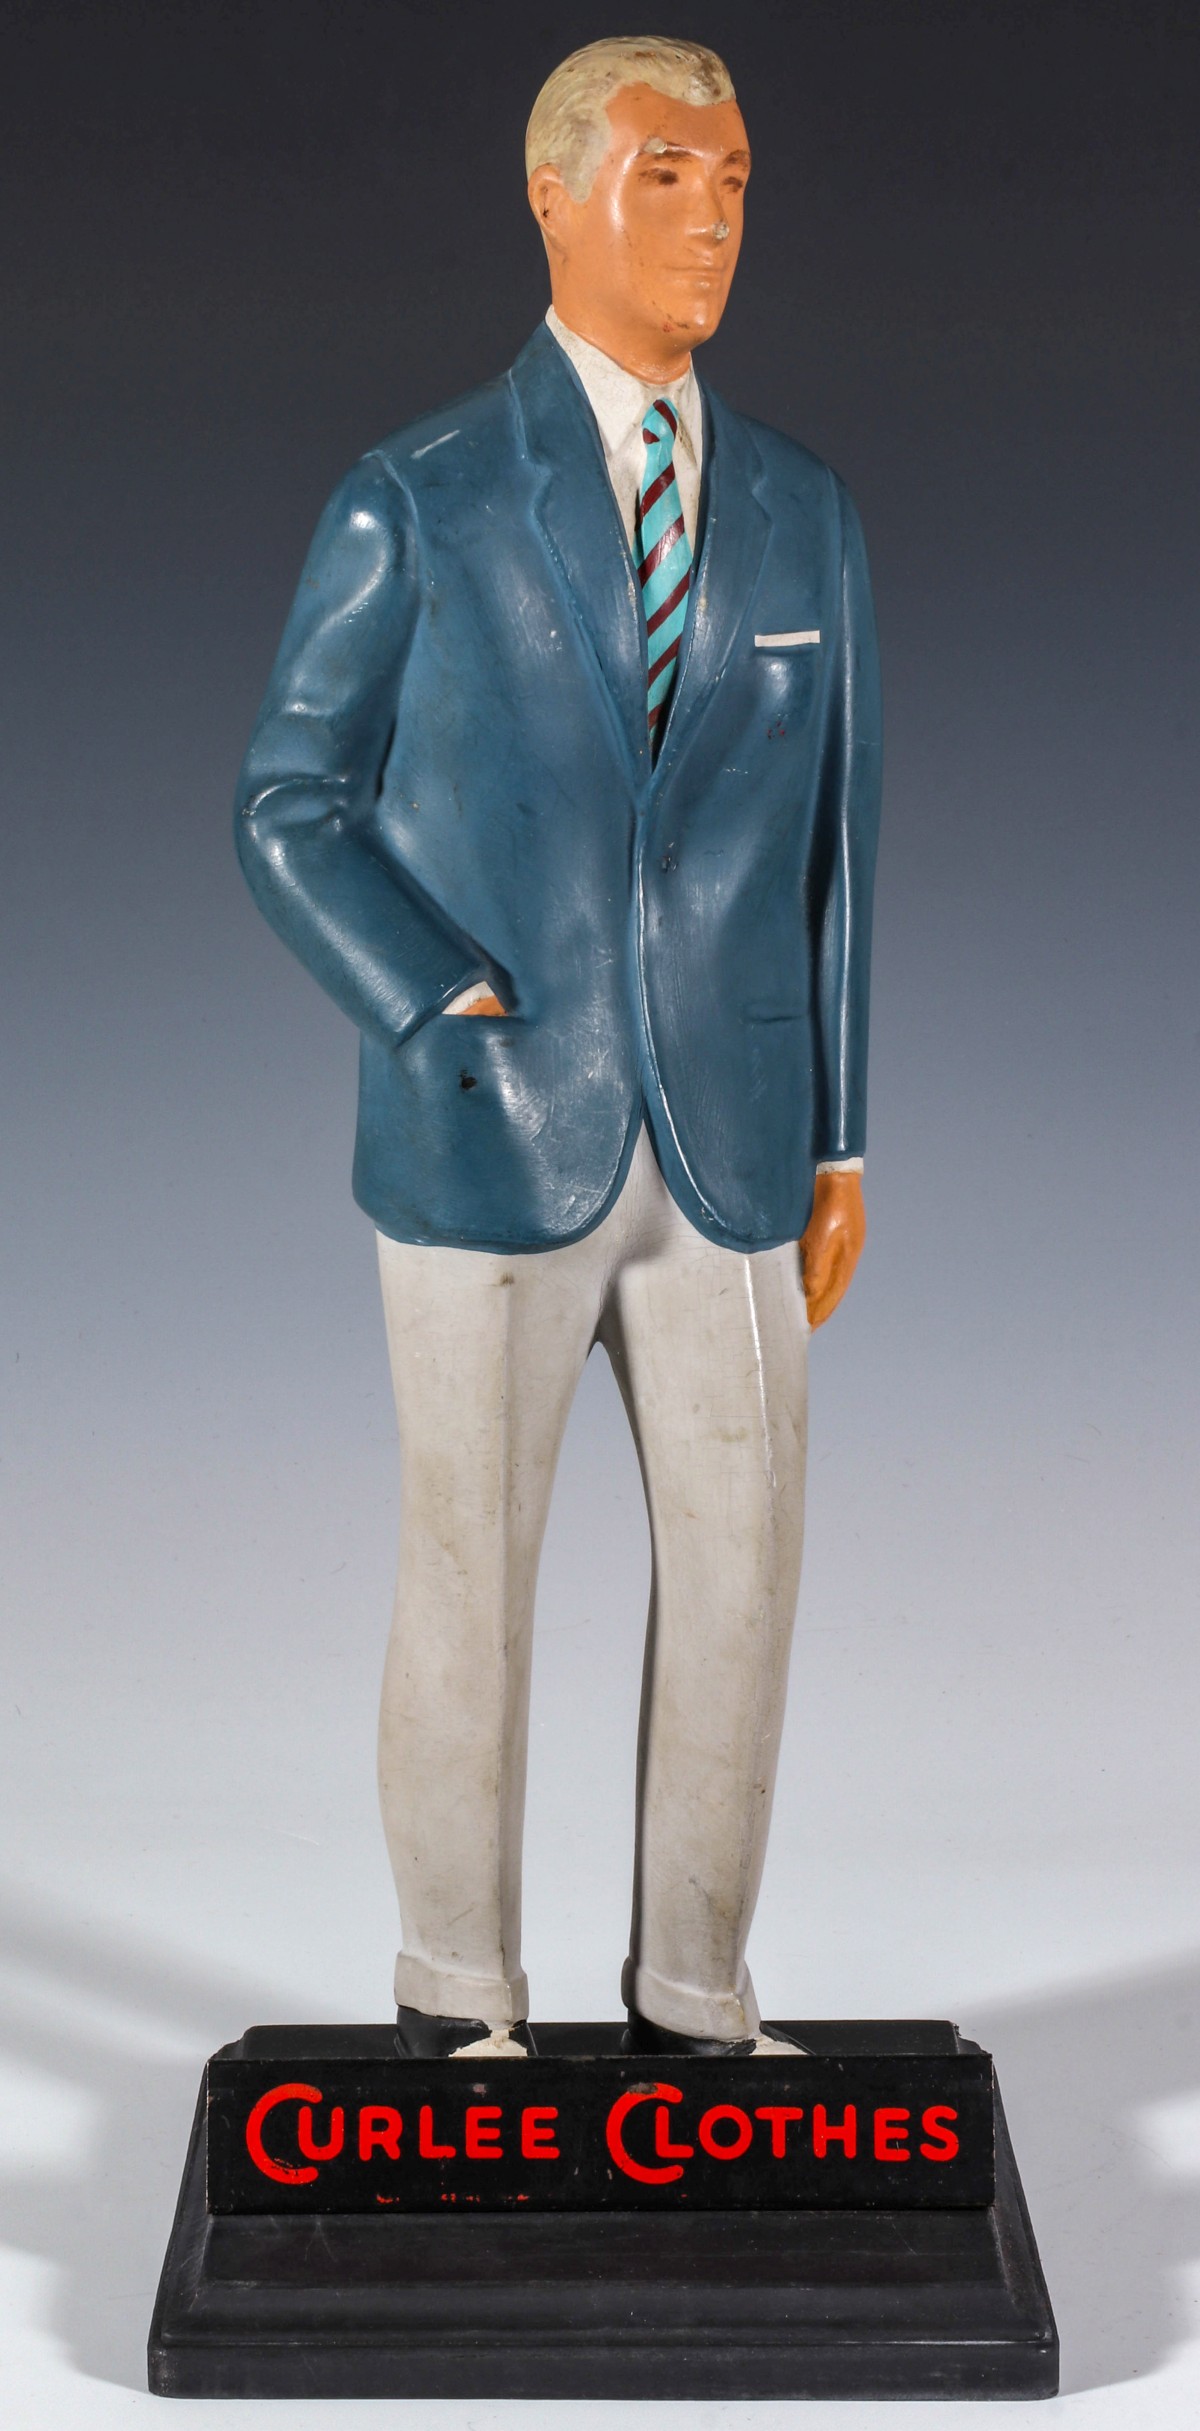 A COUNTER TOP ADVERTISING FIGURE FOR CURLEE CLOTHES